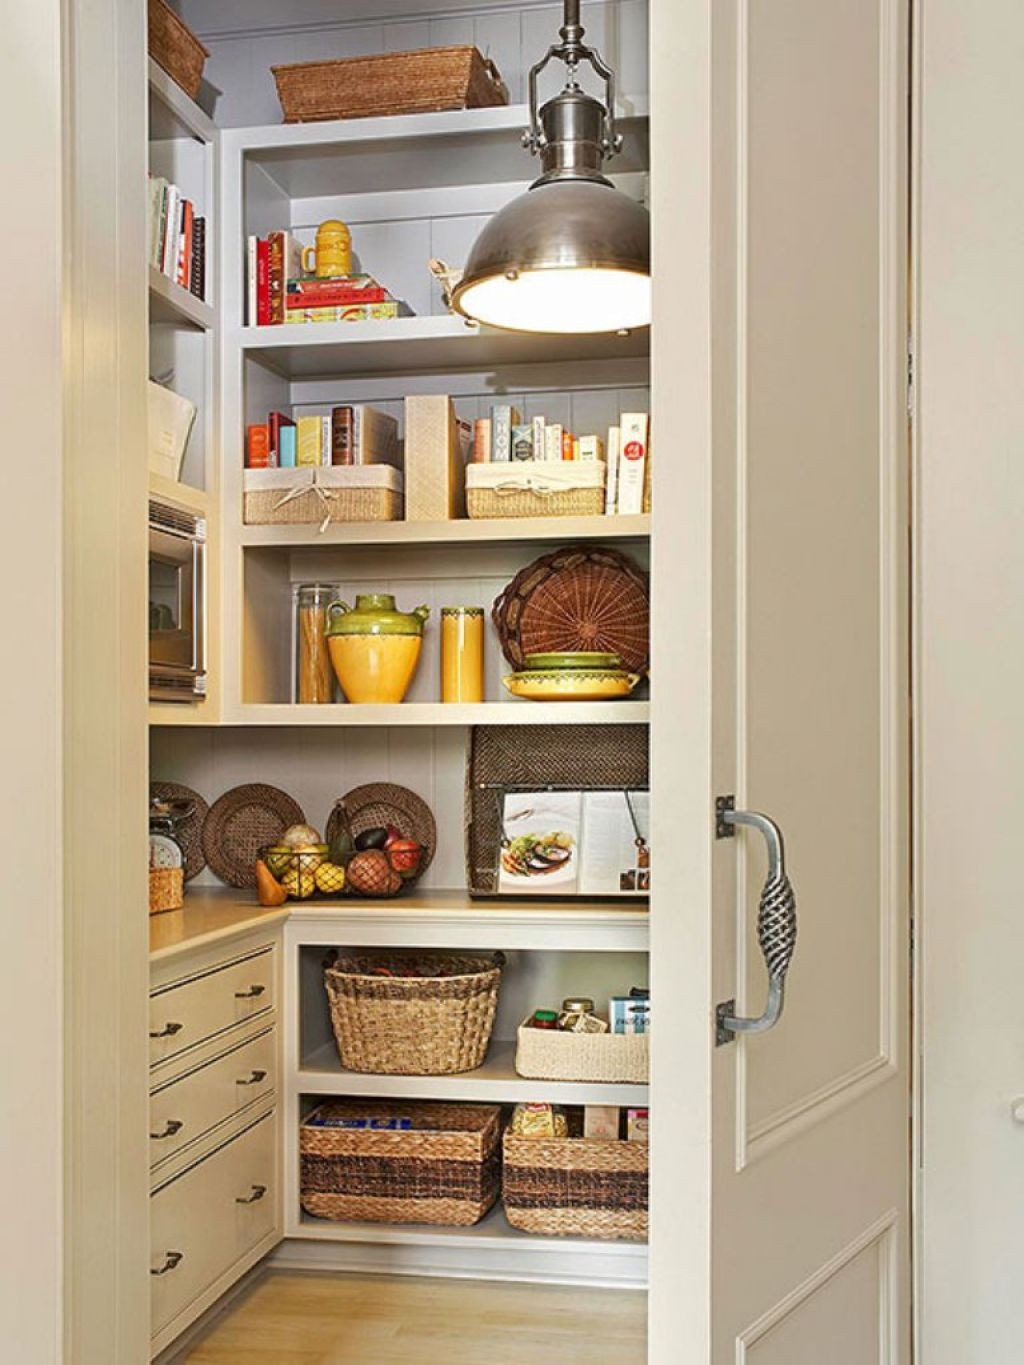 Pantry Ideas For Small Kitchens
 Pantry storage ideas with before and after pictures